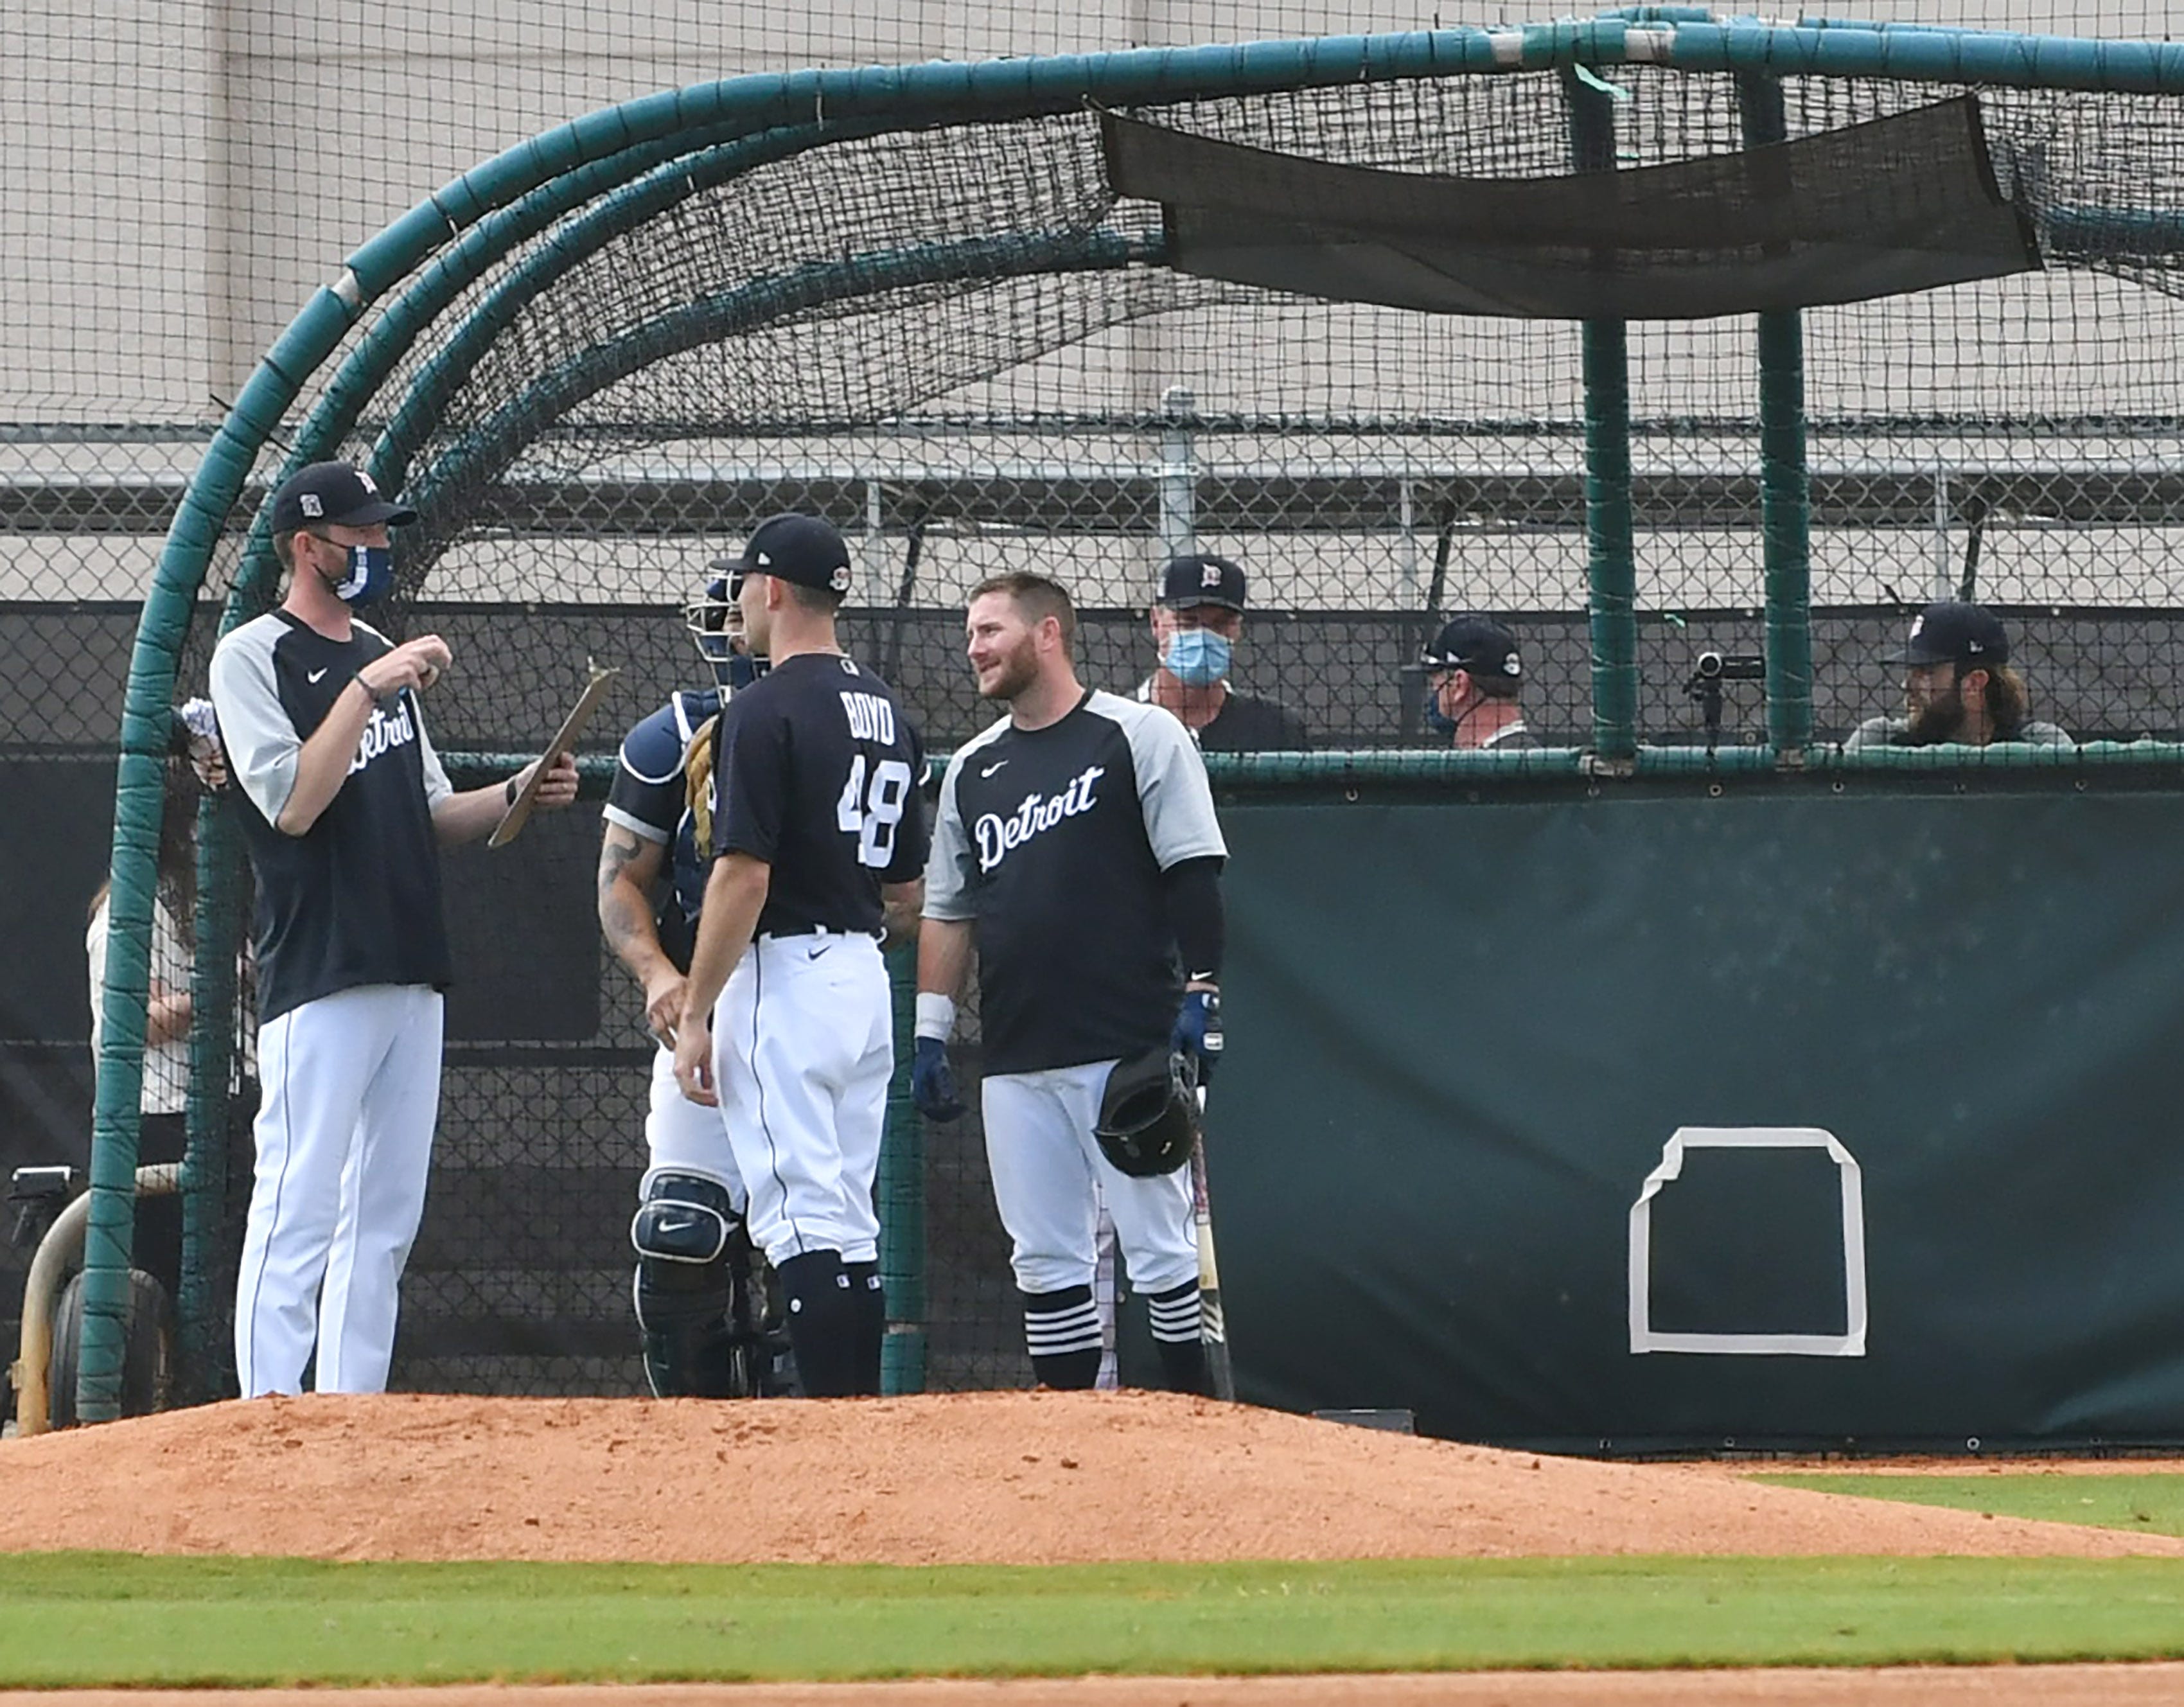 From left, Tigers pitching coach Chris Fetter talks with pitcher Matthew Boyd (48) after Boyd threw live batting practice.